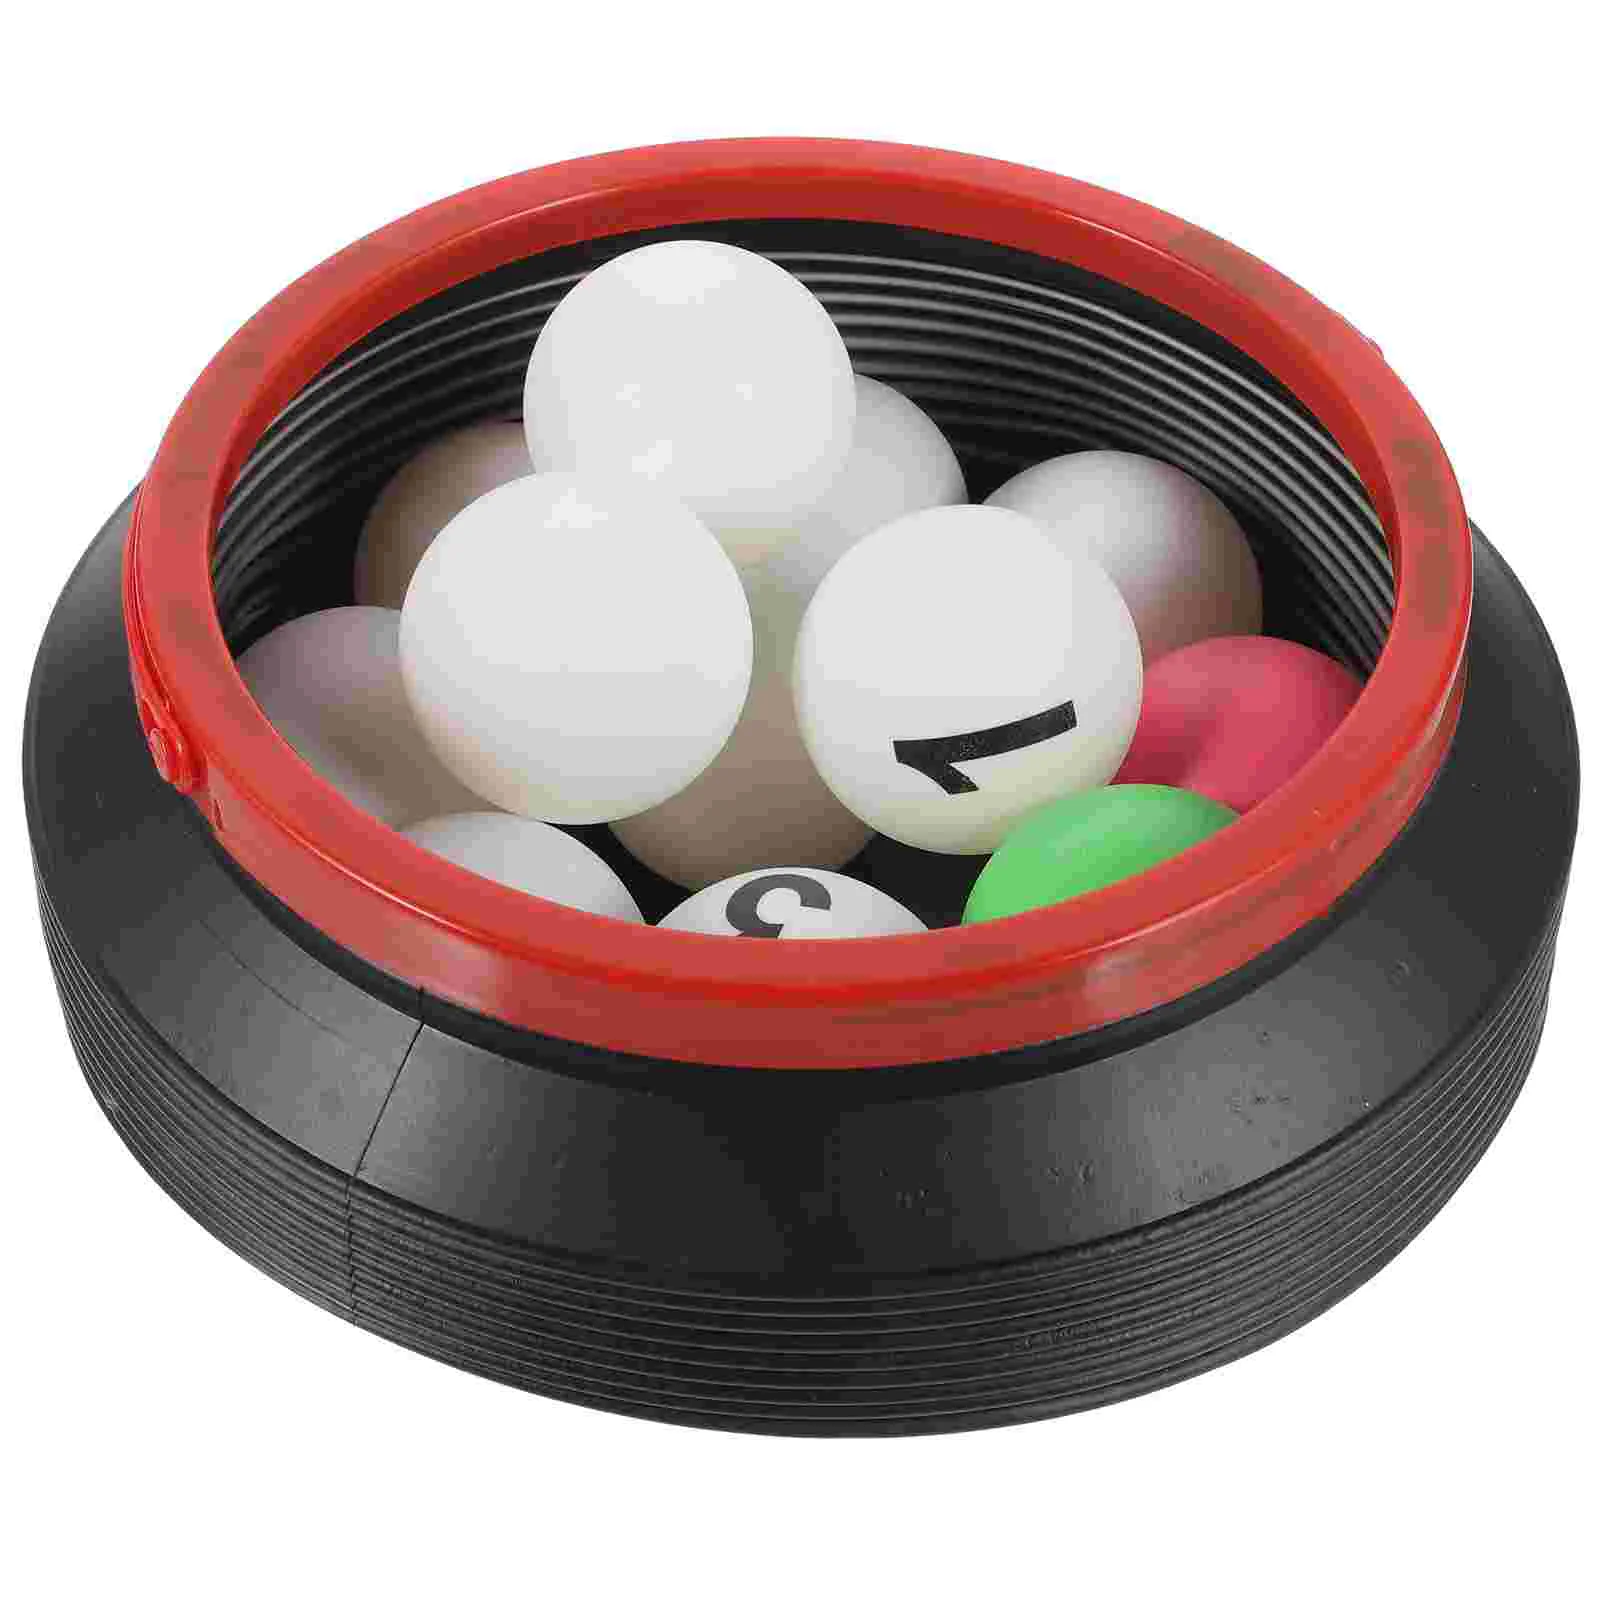 

13pcs Lottery Balls Multi- Color Bingo Balls Table Tennis Balls Printed Pong Balls for Lottery Game Party Favors with Storage